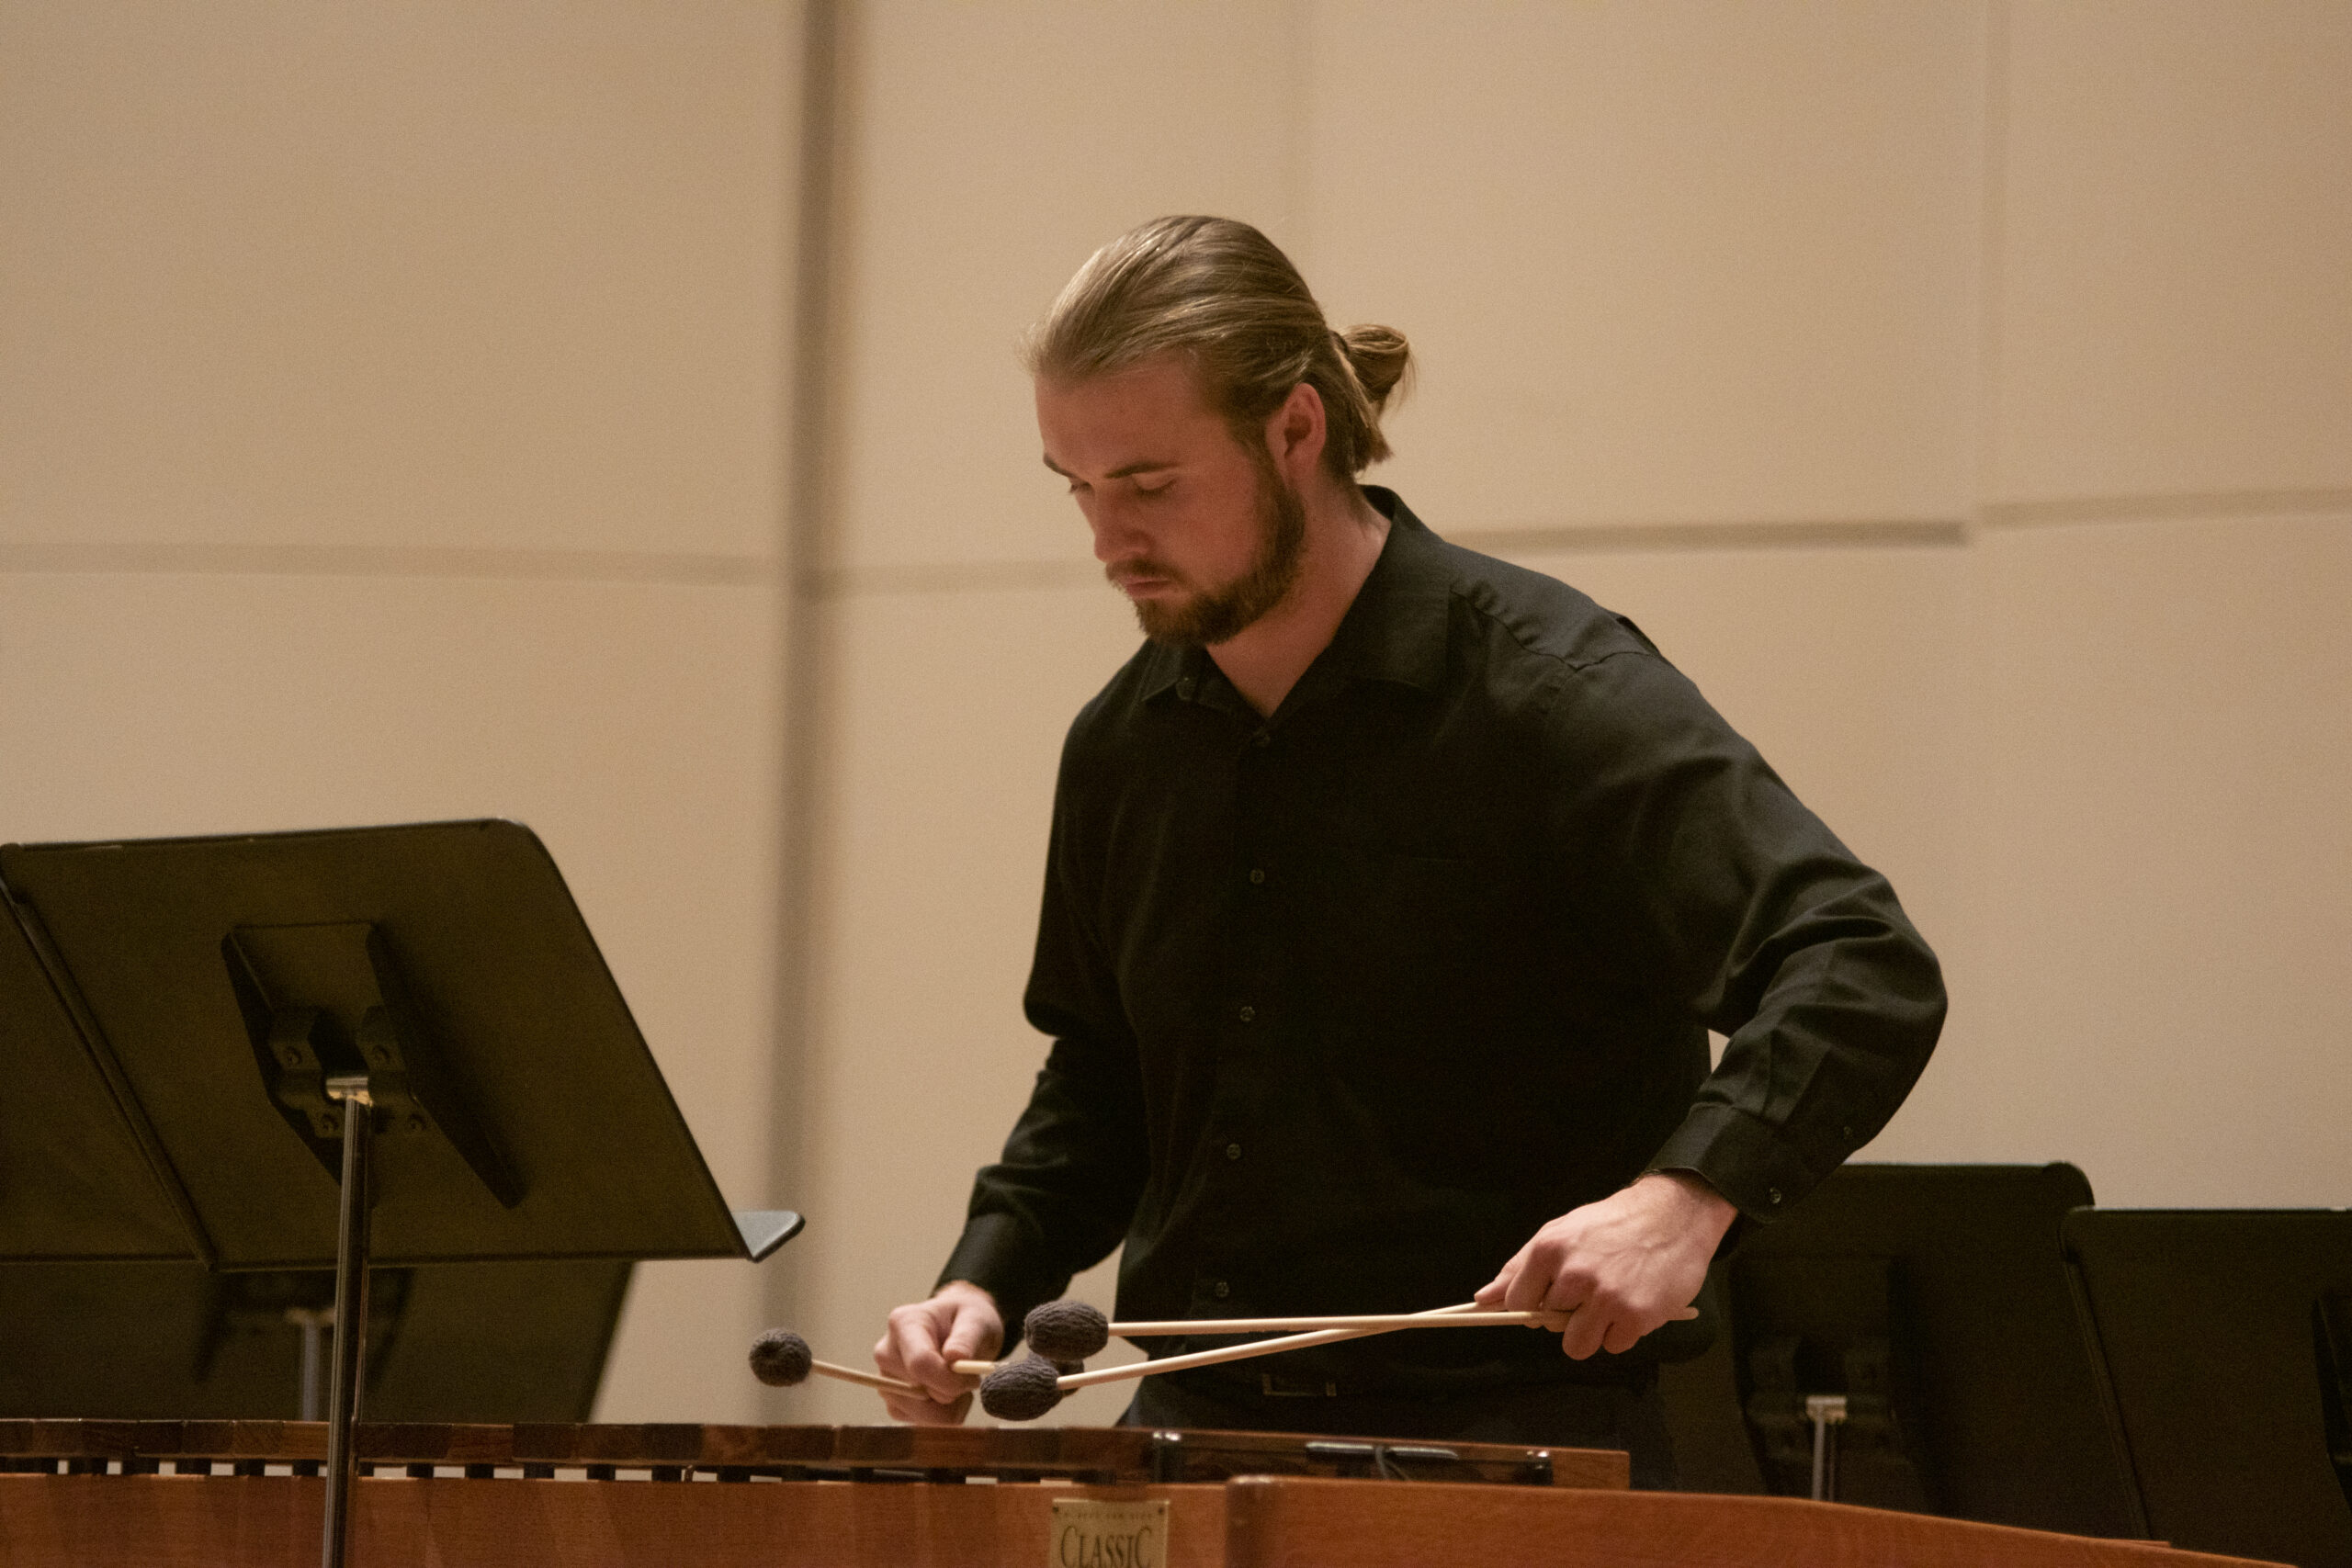 The UNR Percussion Ensemble may be small, but they are mighty… and entertaining